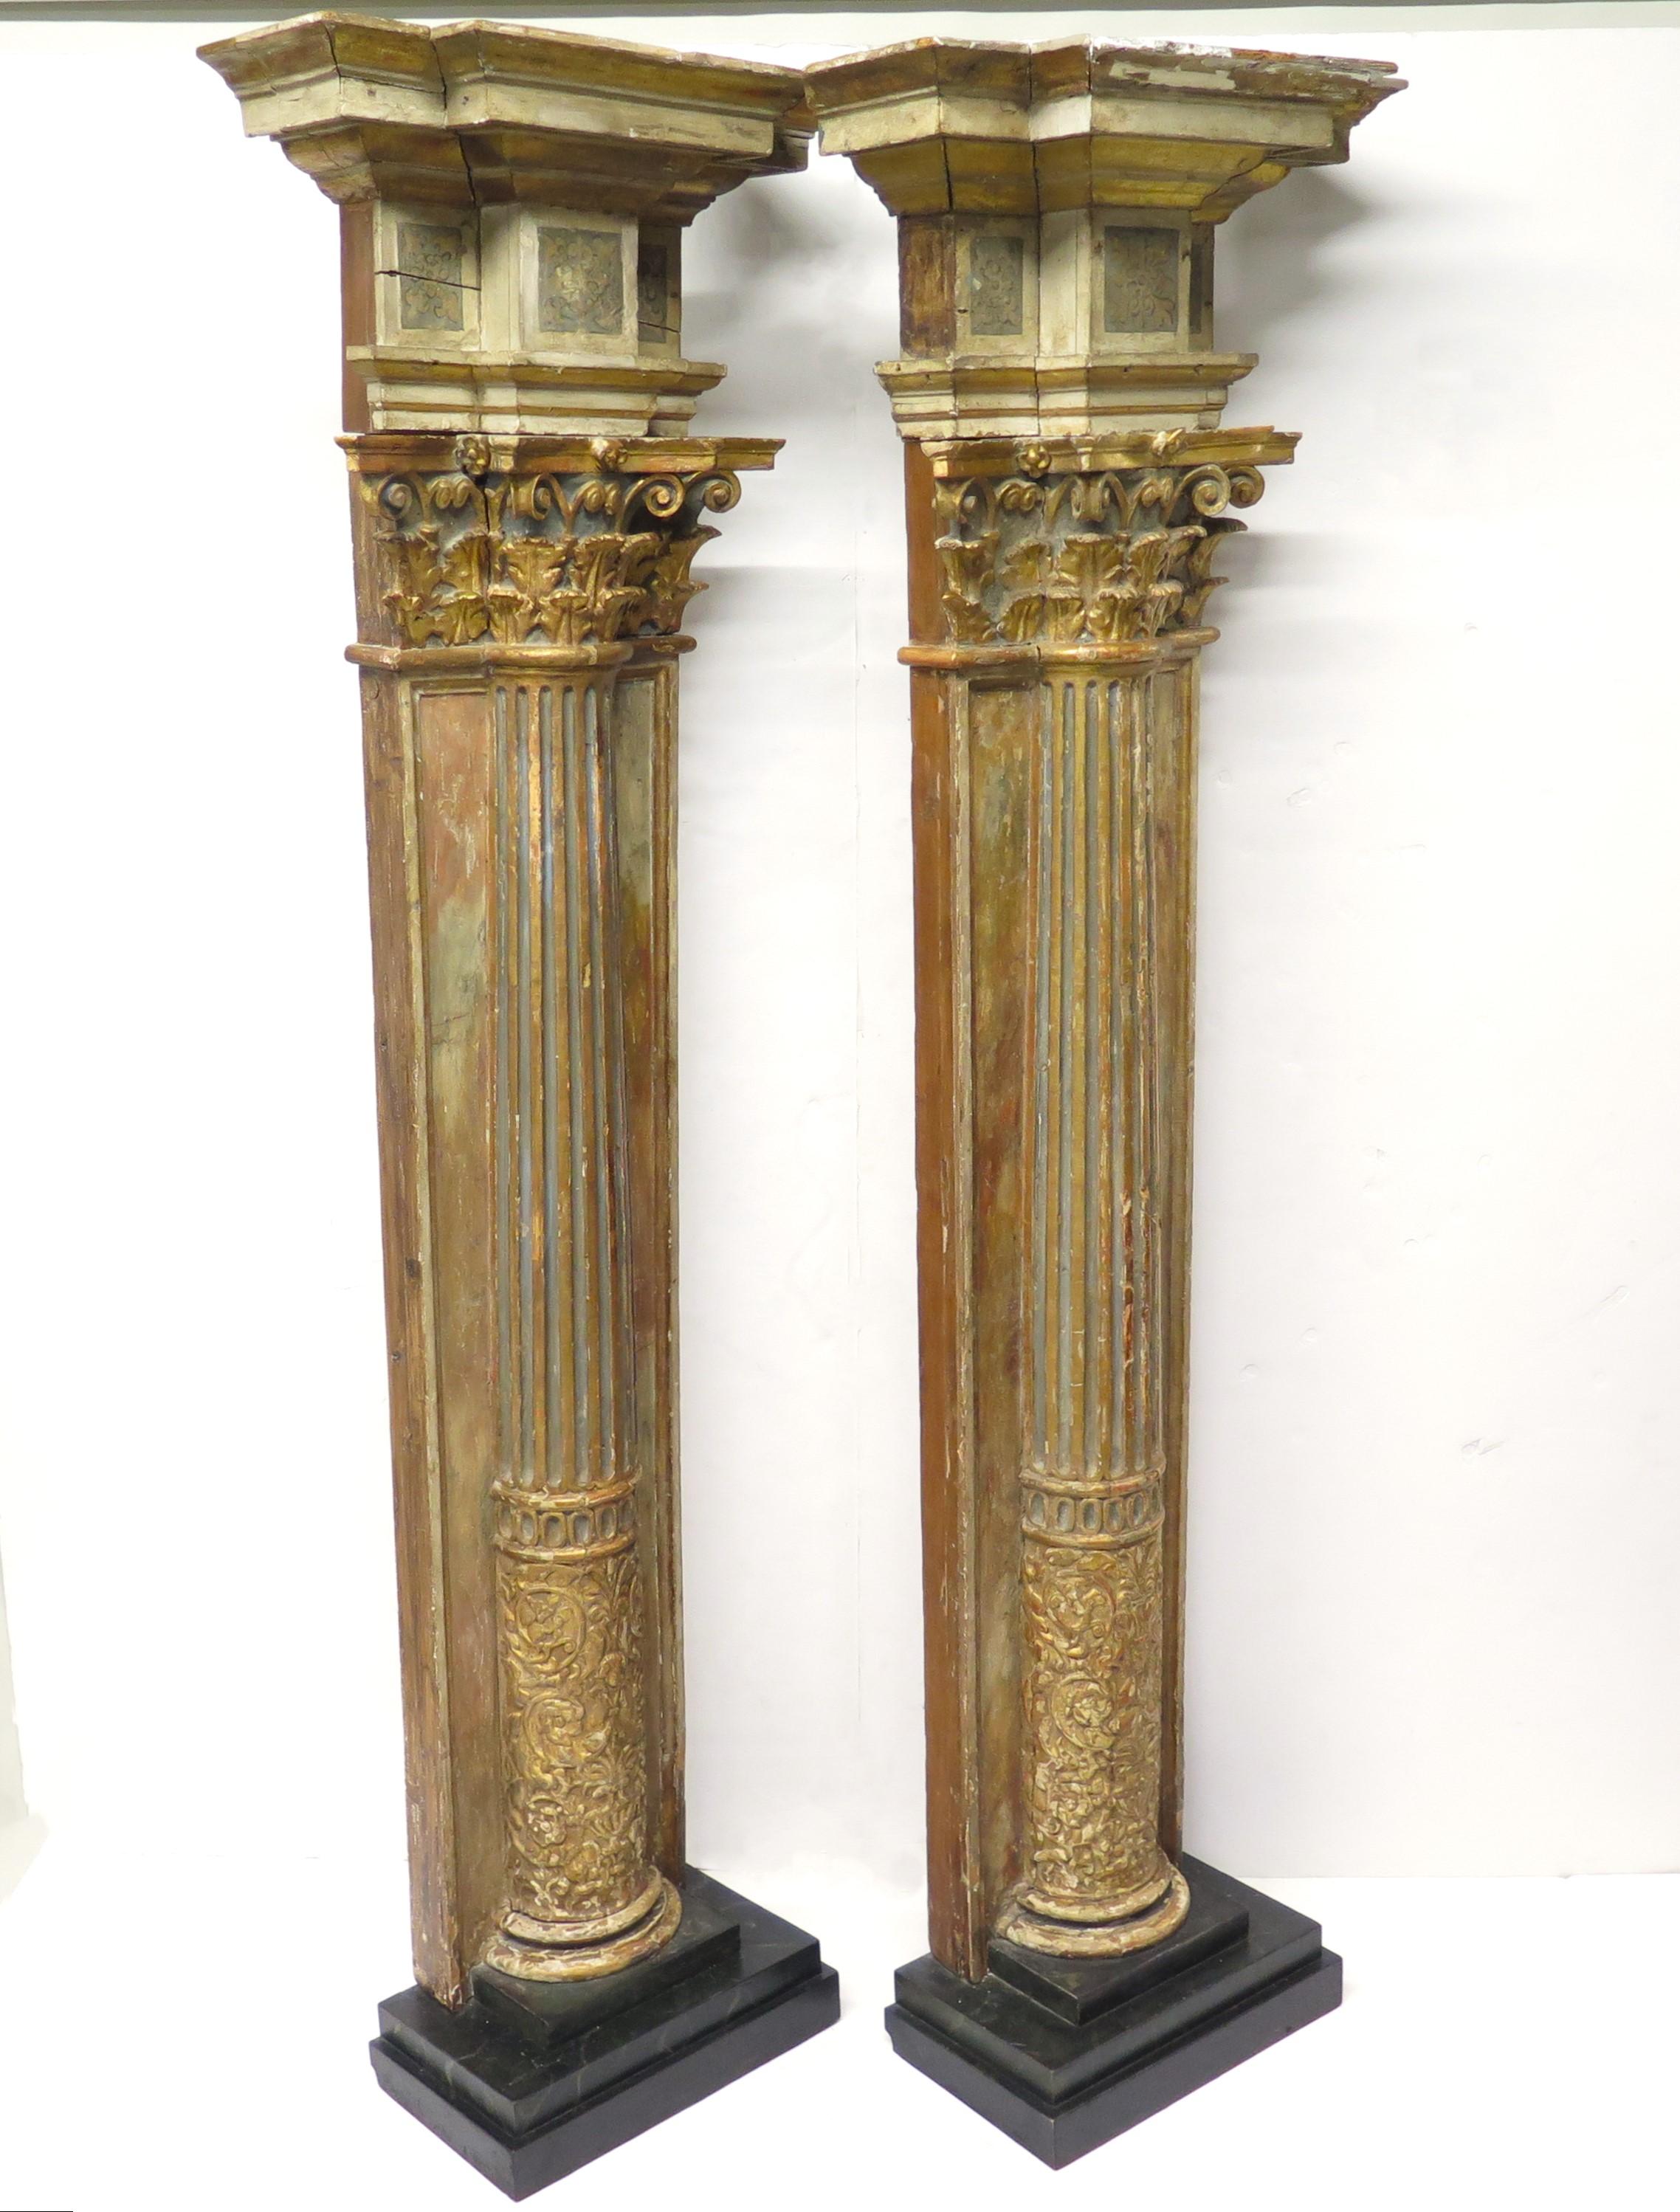 Pair of Italian Neoclassical Giltwood and Polychrome Columns For Sale 1